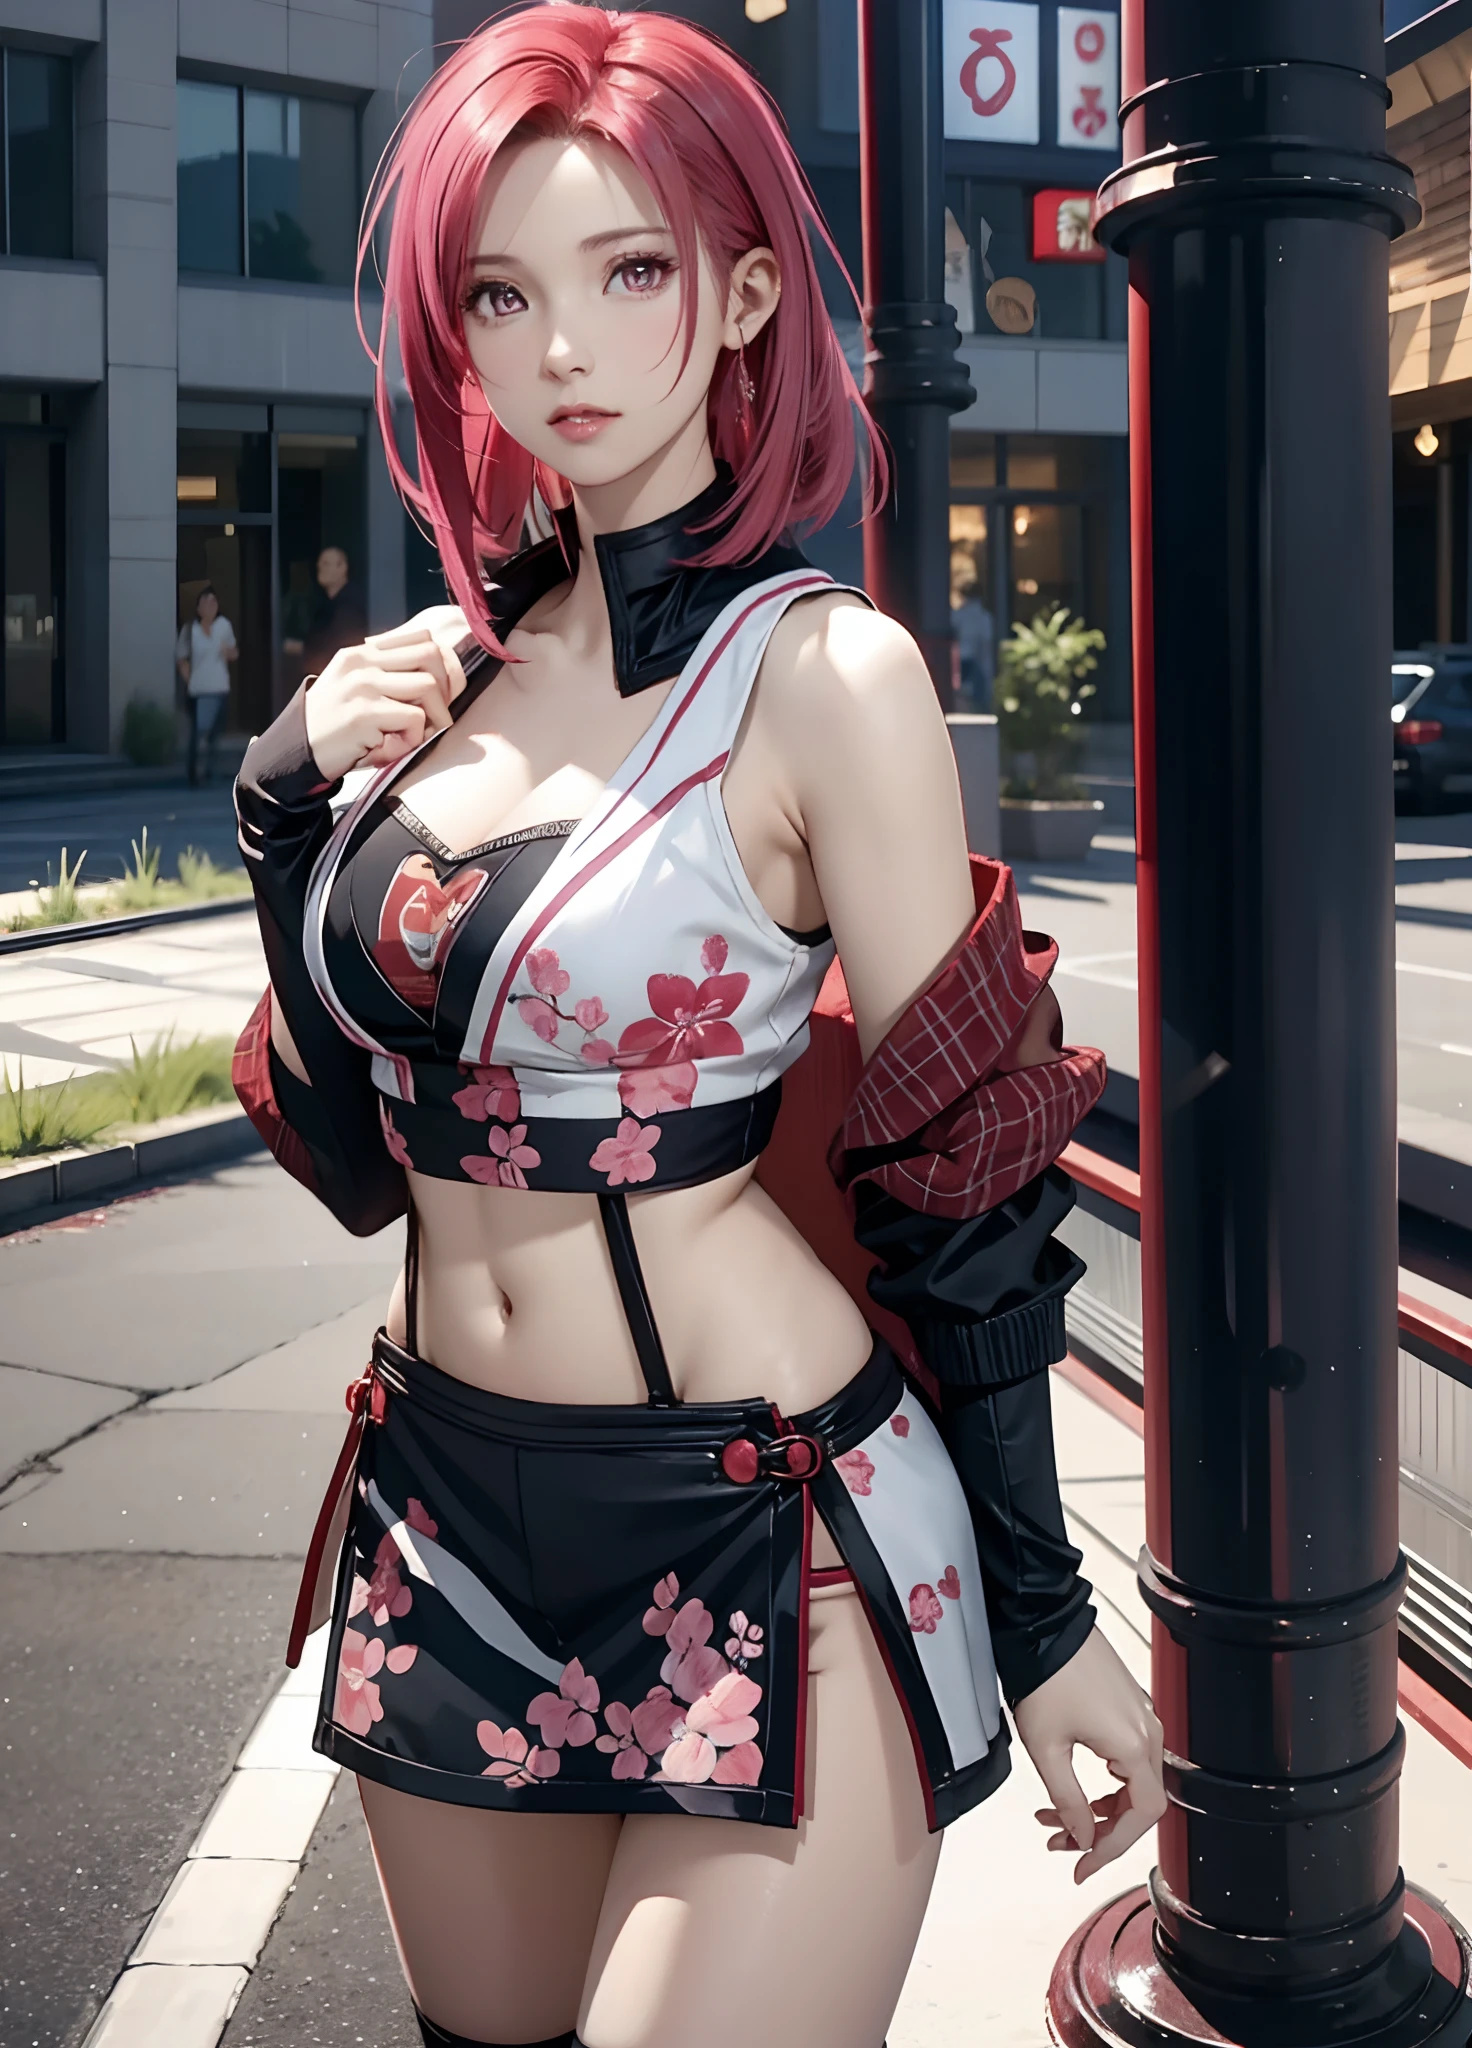 sakura haruno, Seductive, ((forehead to show)), Attractive, Sexy eyes, Red coat, Pink hair, Delicate, young, Short hair, Detailed face, High Definition, Full body, from league of legends, Trending in art stations, by RHADS, andreas rocha, rossdraws, By Shinkai Makoto, Laurie Greasley, Royce of Barre, Ilya Kuvshinov and Greg Rutkowski